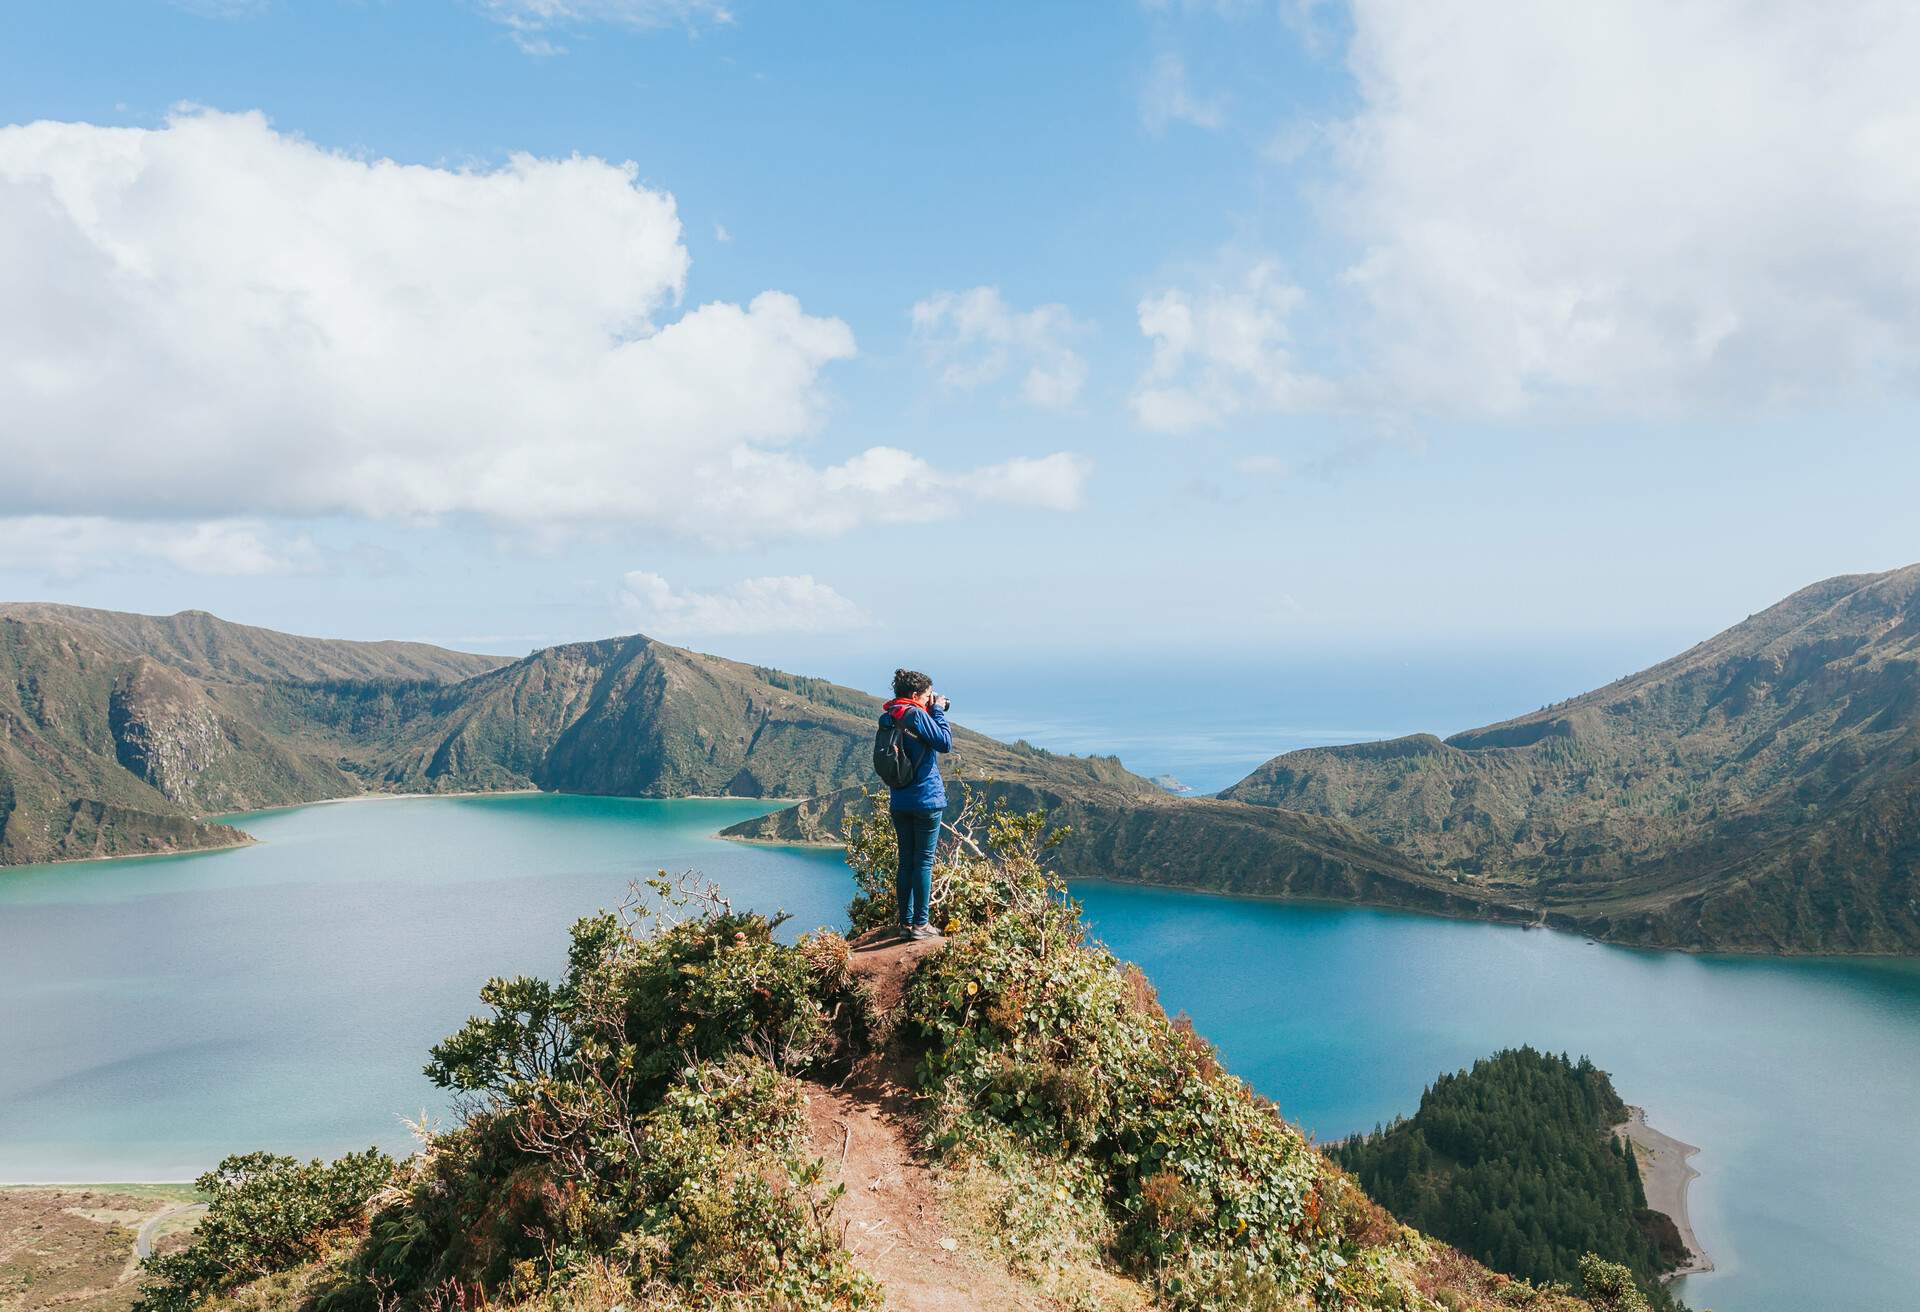 A person stands on a narrow cliff to take a photo of a turquoise lake surrounded by mountains PORTUGAL, AZORES